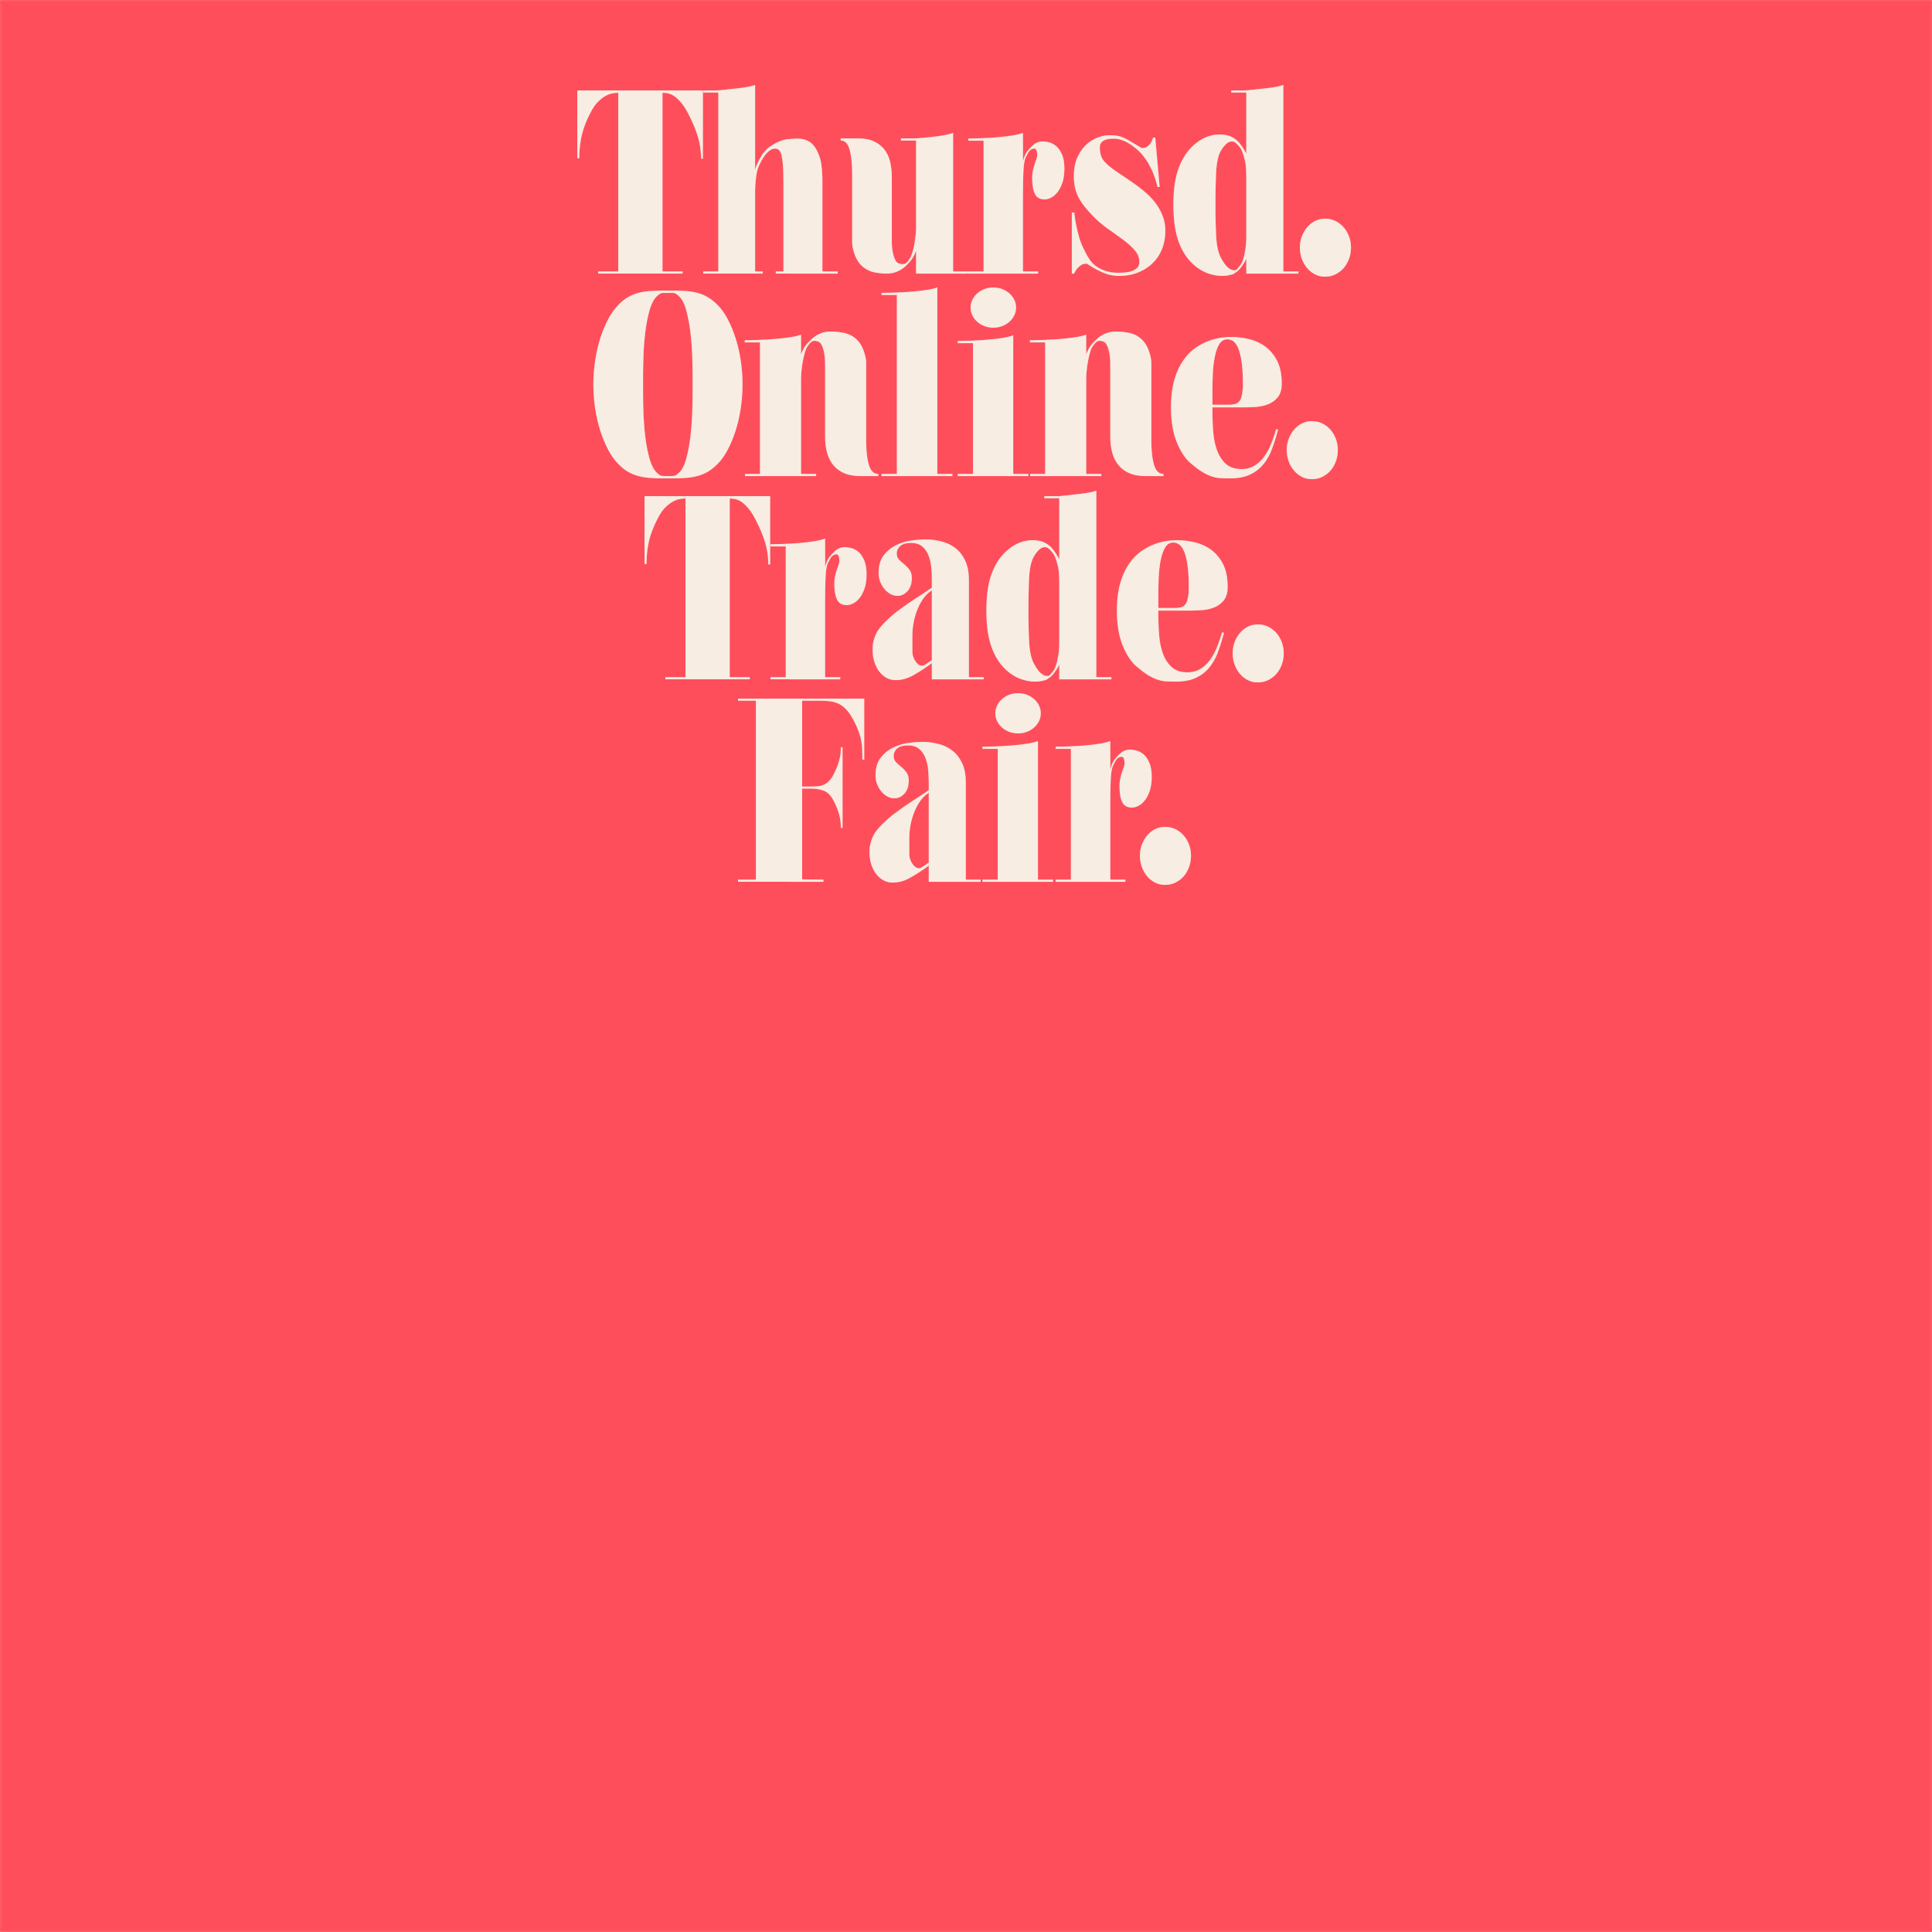 Online Fair From Thursd.com Will Continue in January 2022